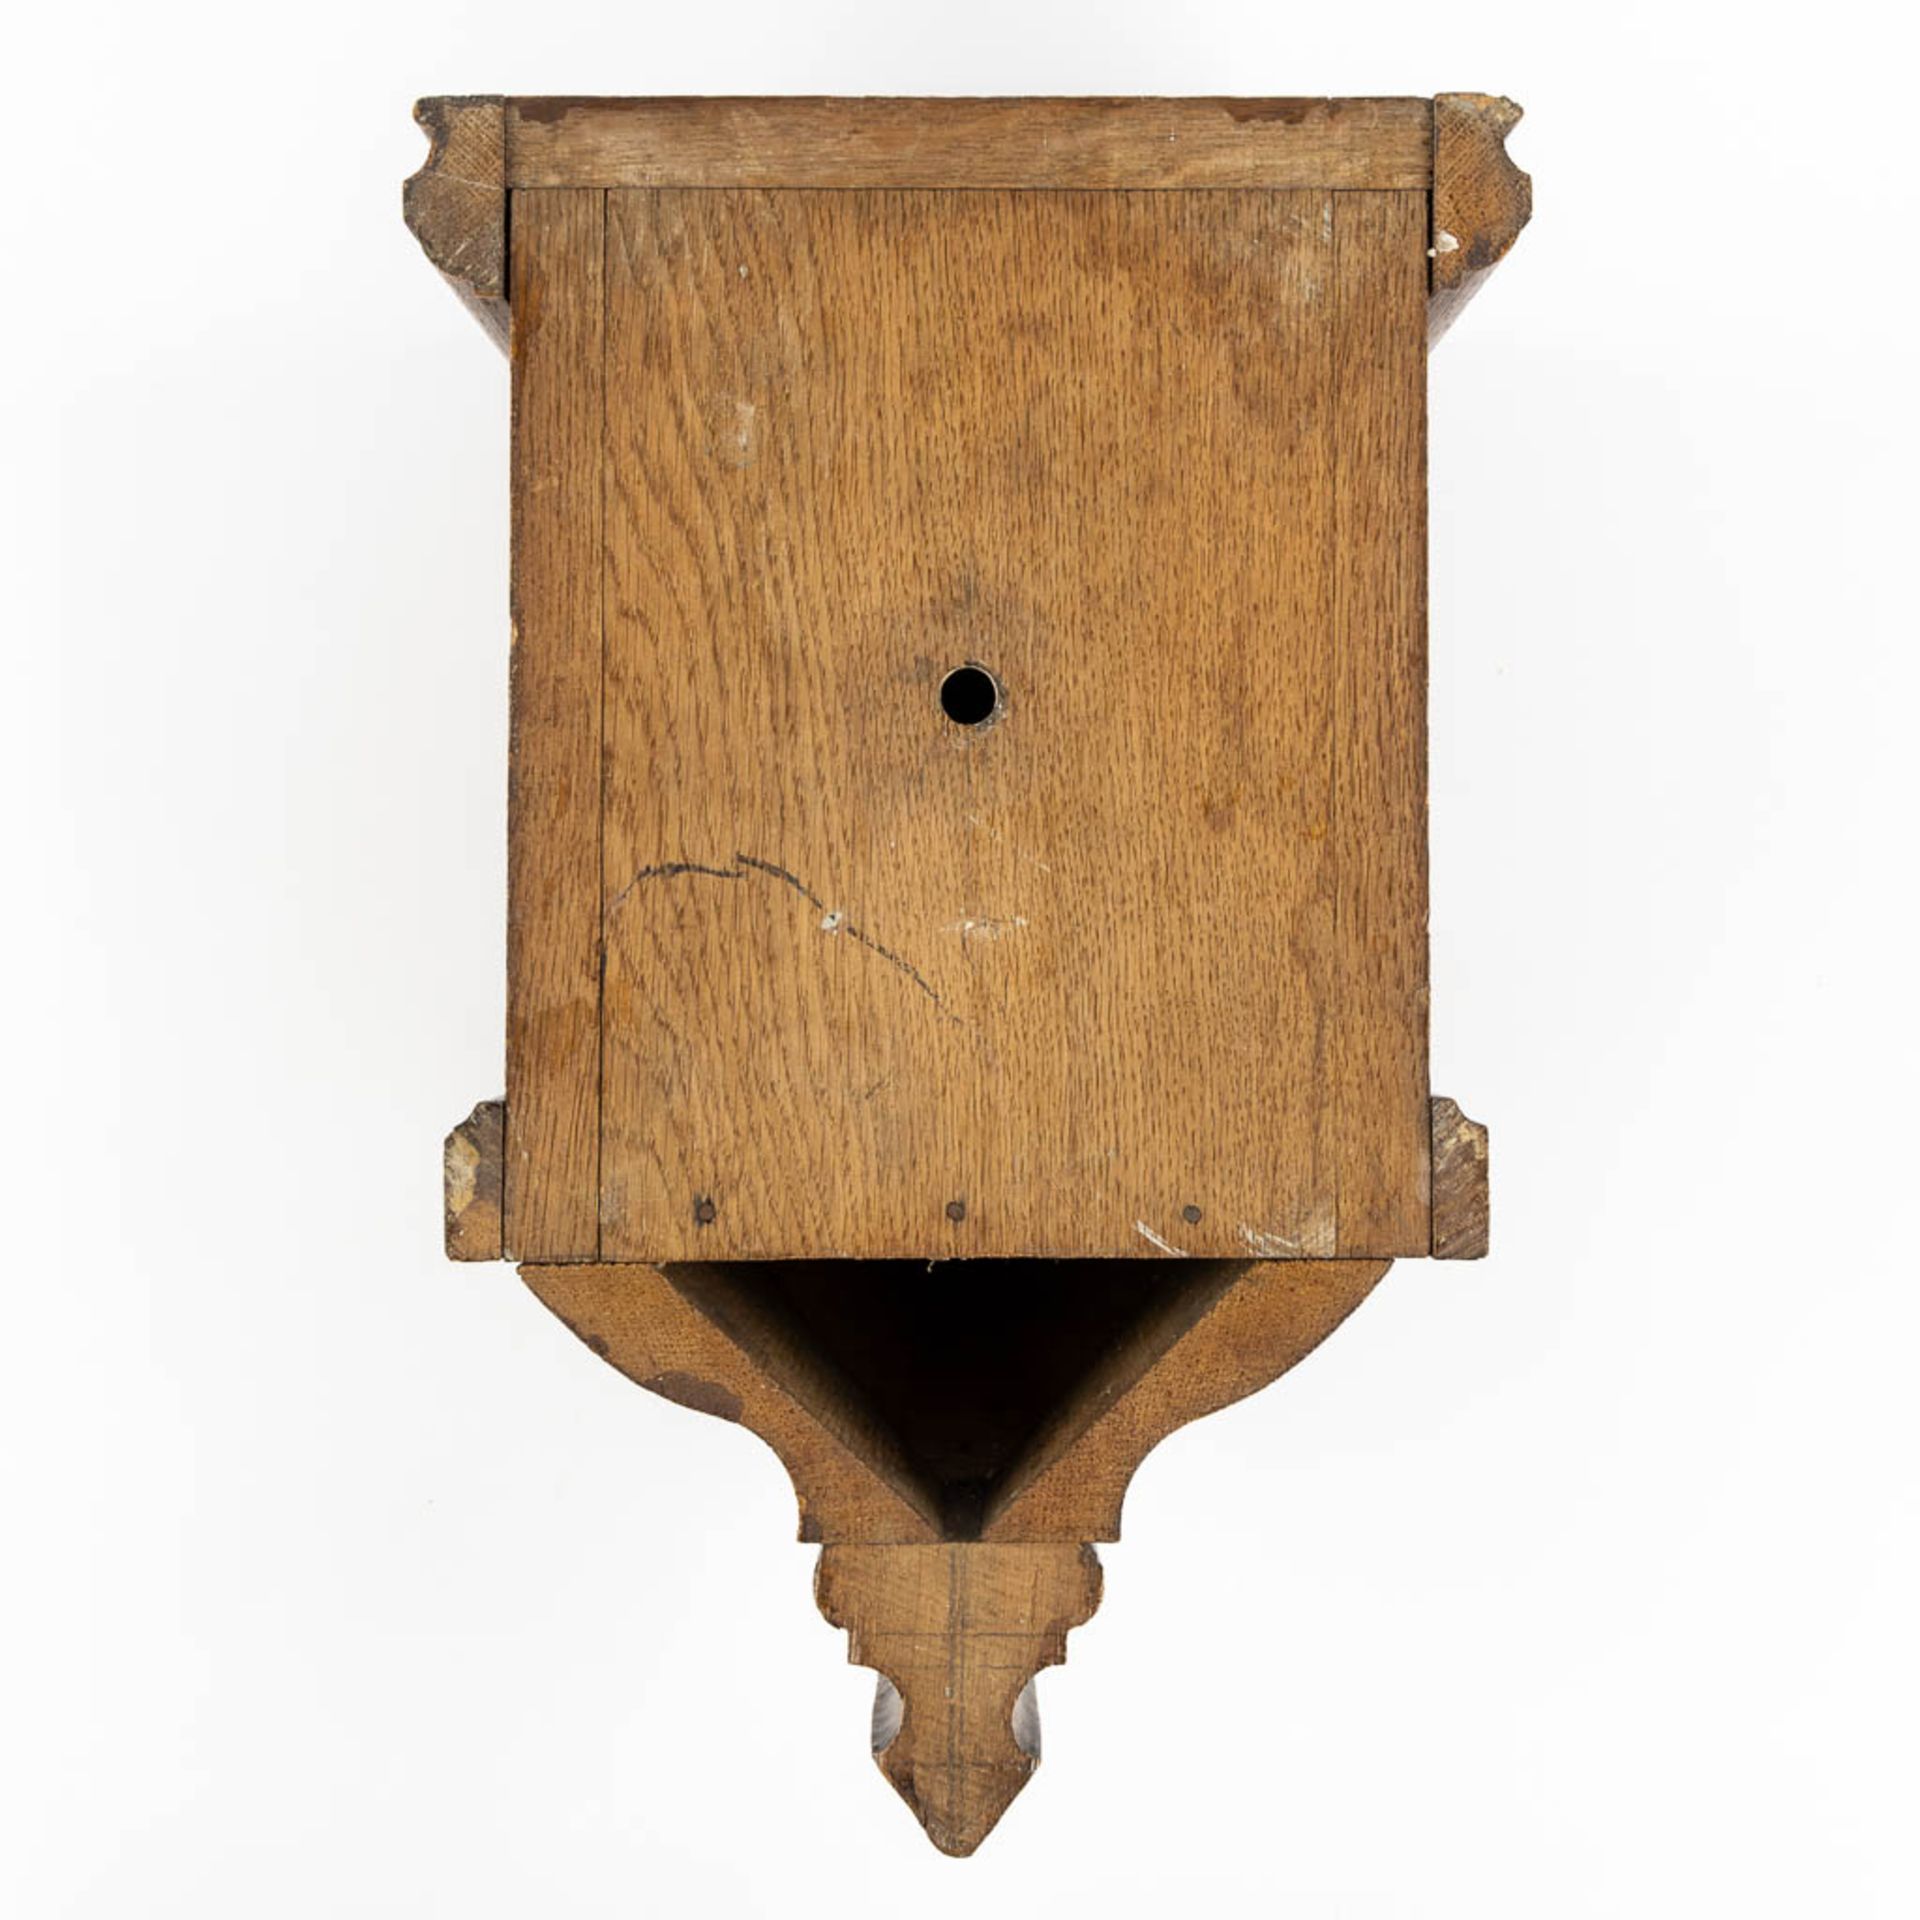 An Offertory or Poor box, sculptured oak, gothic revival. (L:20 x W:27 x H:42 cm) - Image 10 of 11